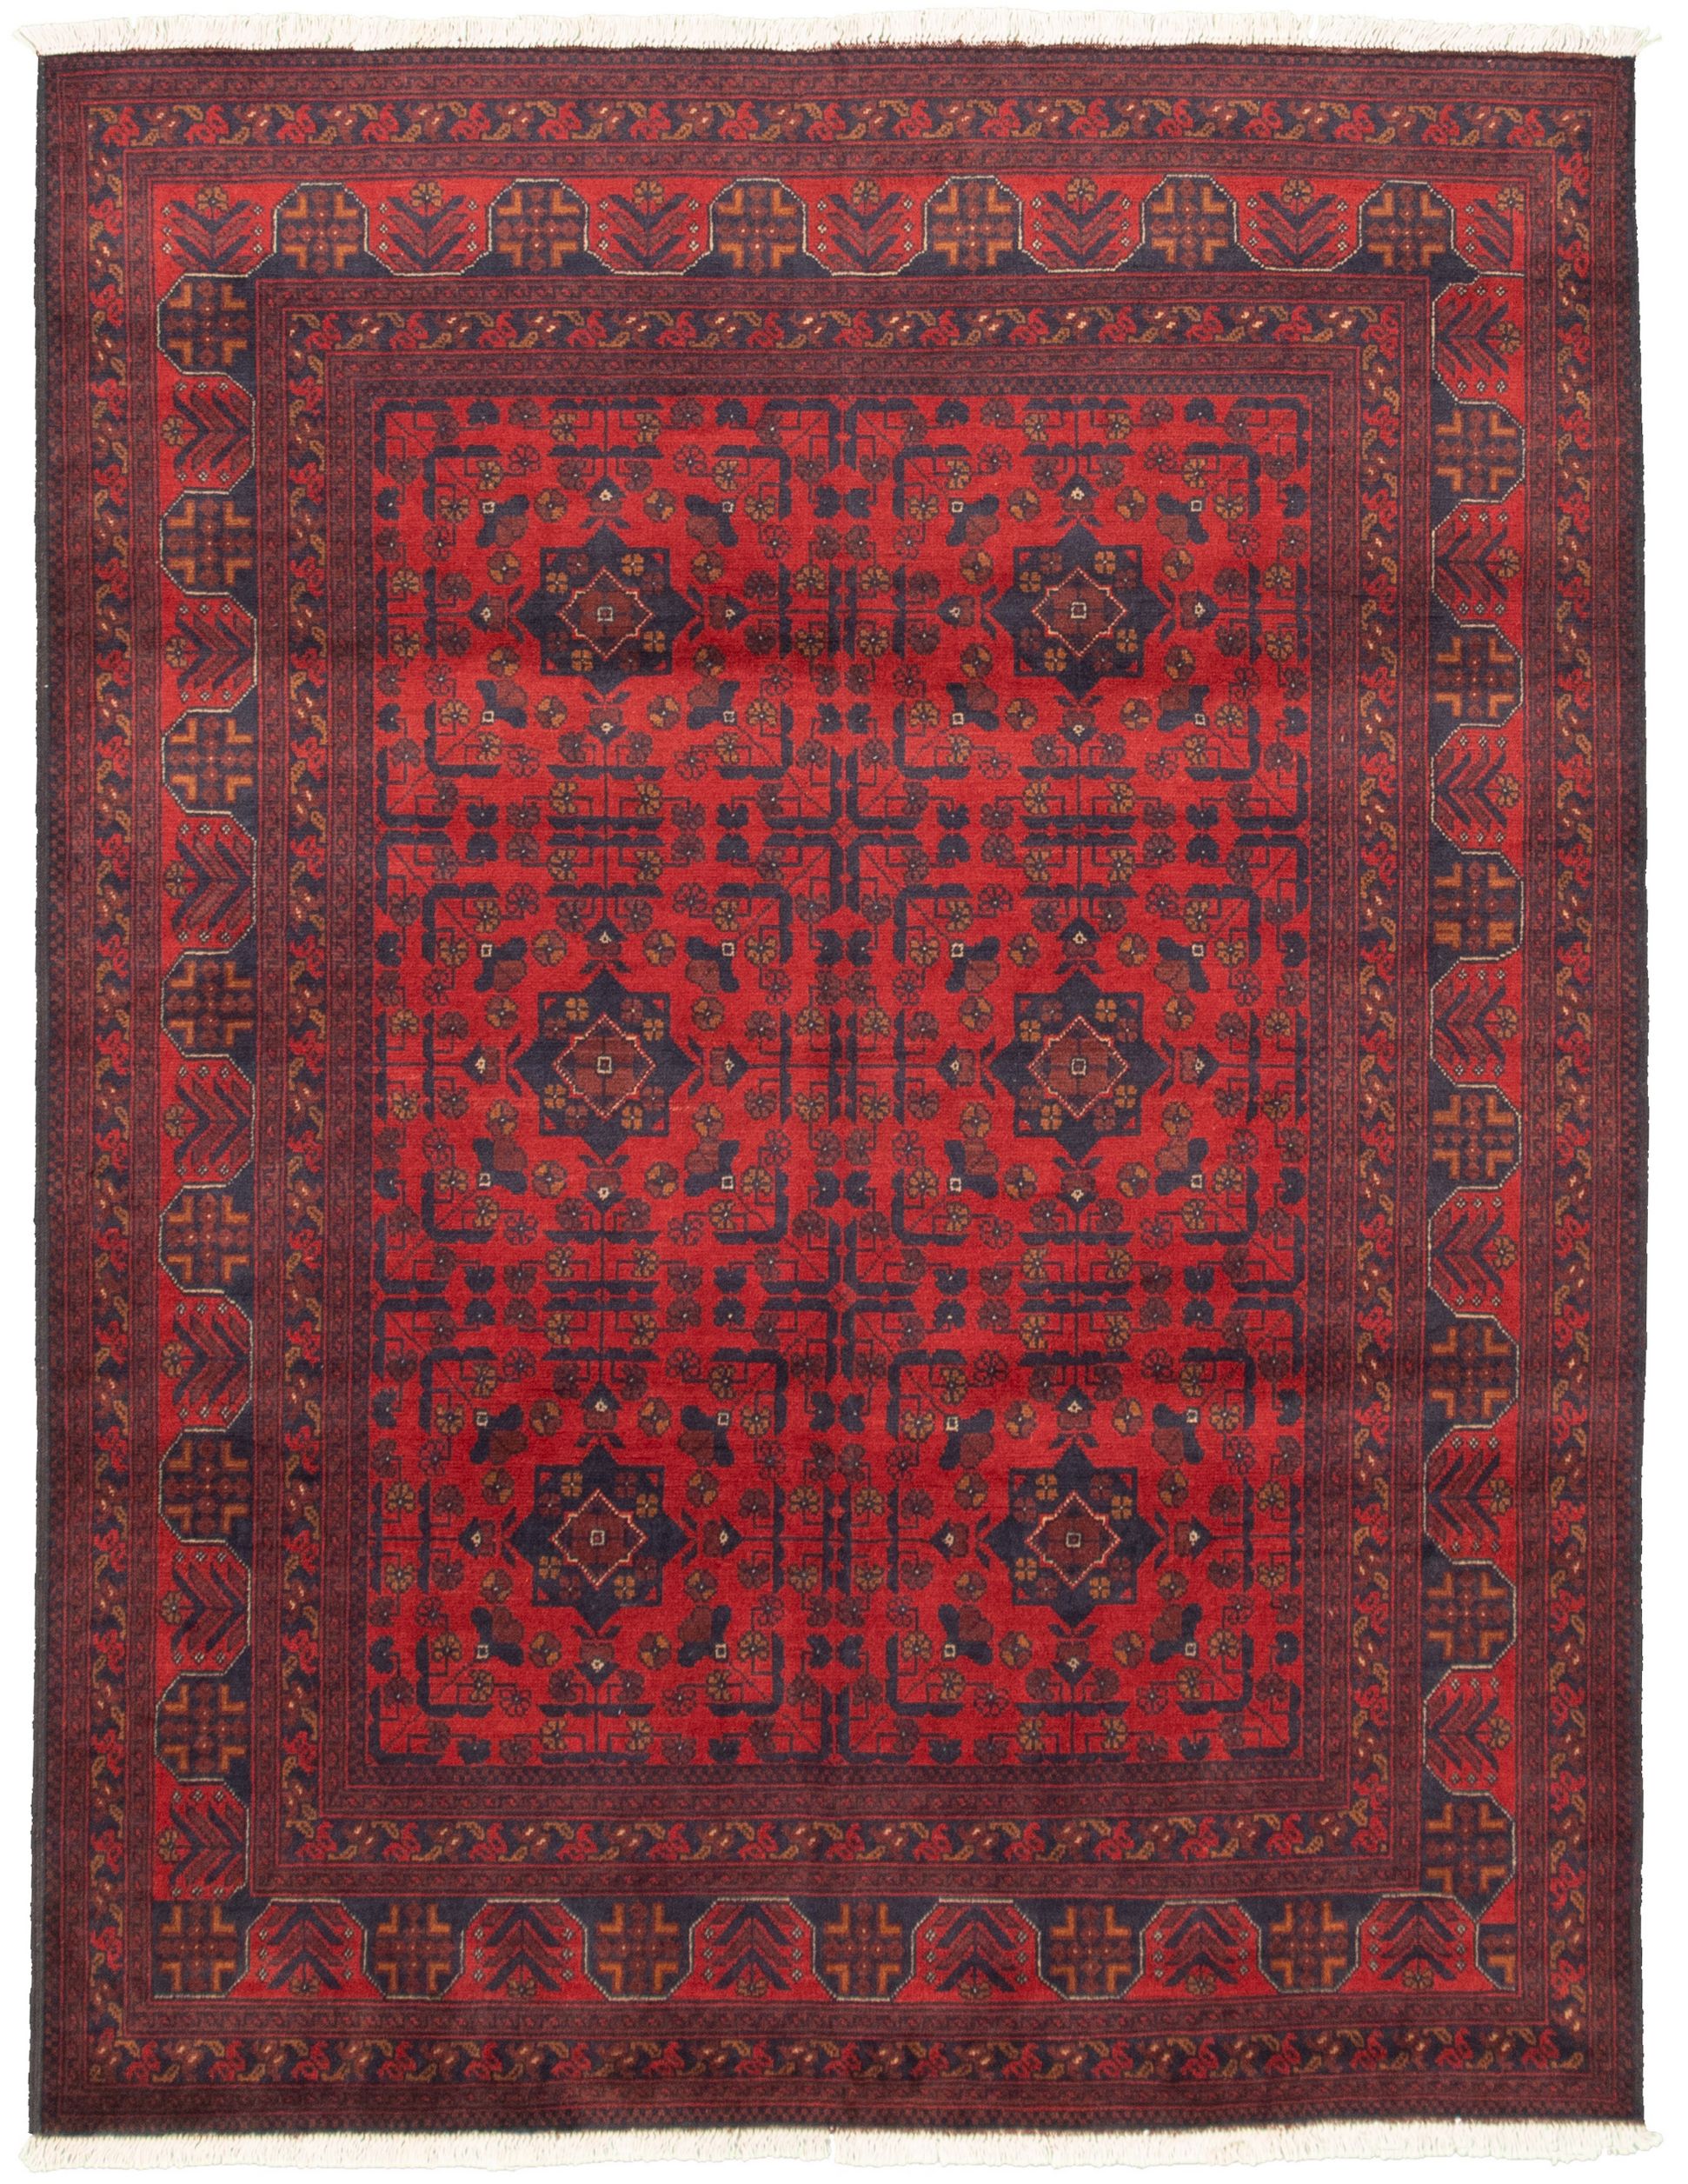 Hand-knotted Finest Khal Mohammadi Red Wool Rug 5'9" x 7'6"  Size: 5'9" x 7'6"  